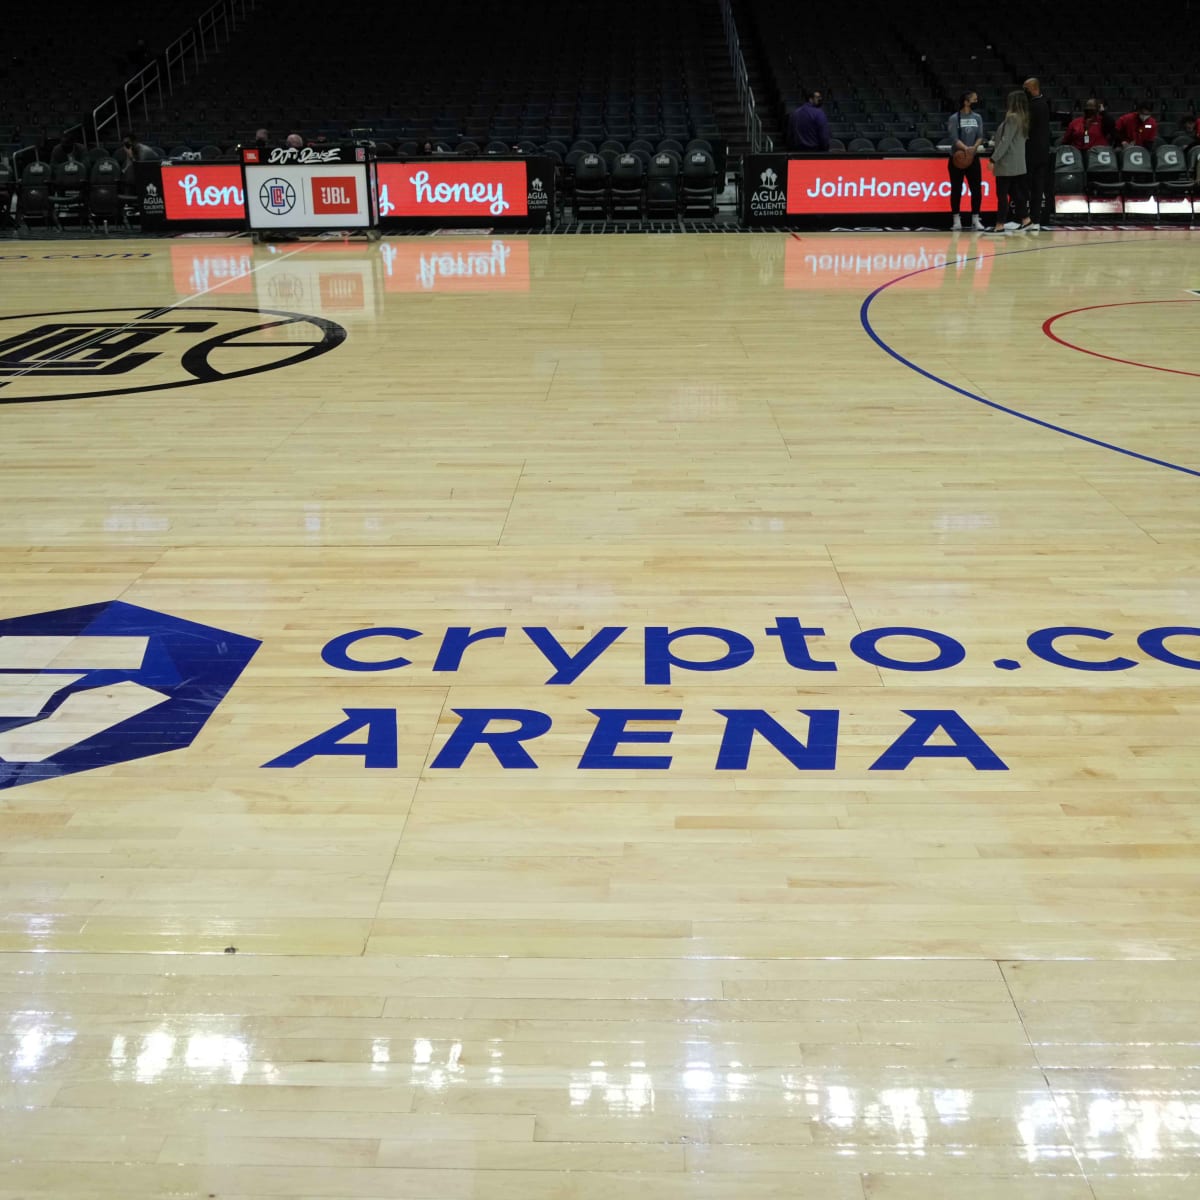 Crypto.com Arena Is Keeping Its Name